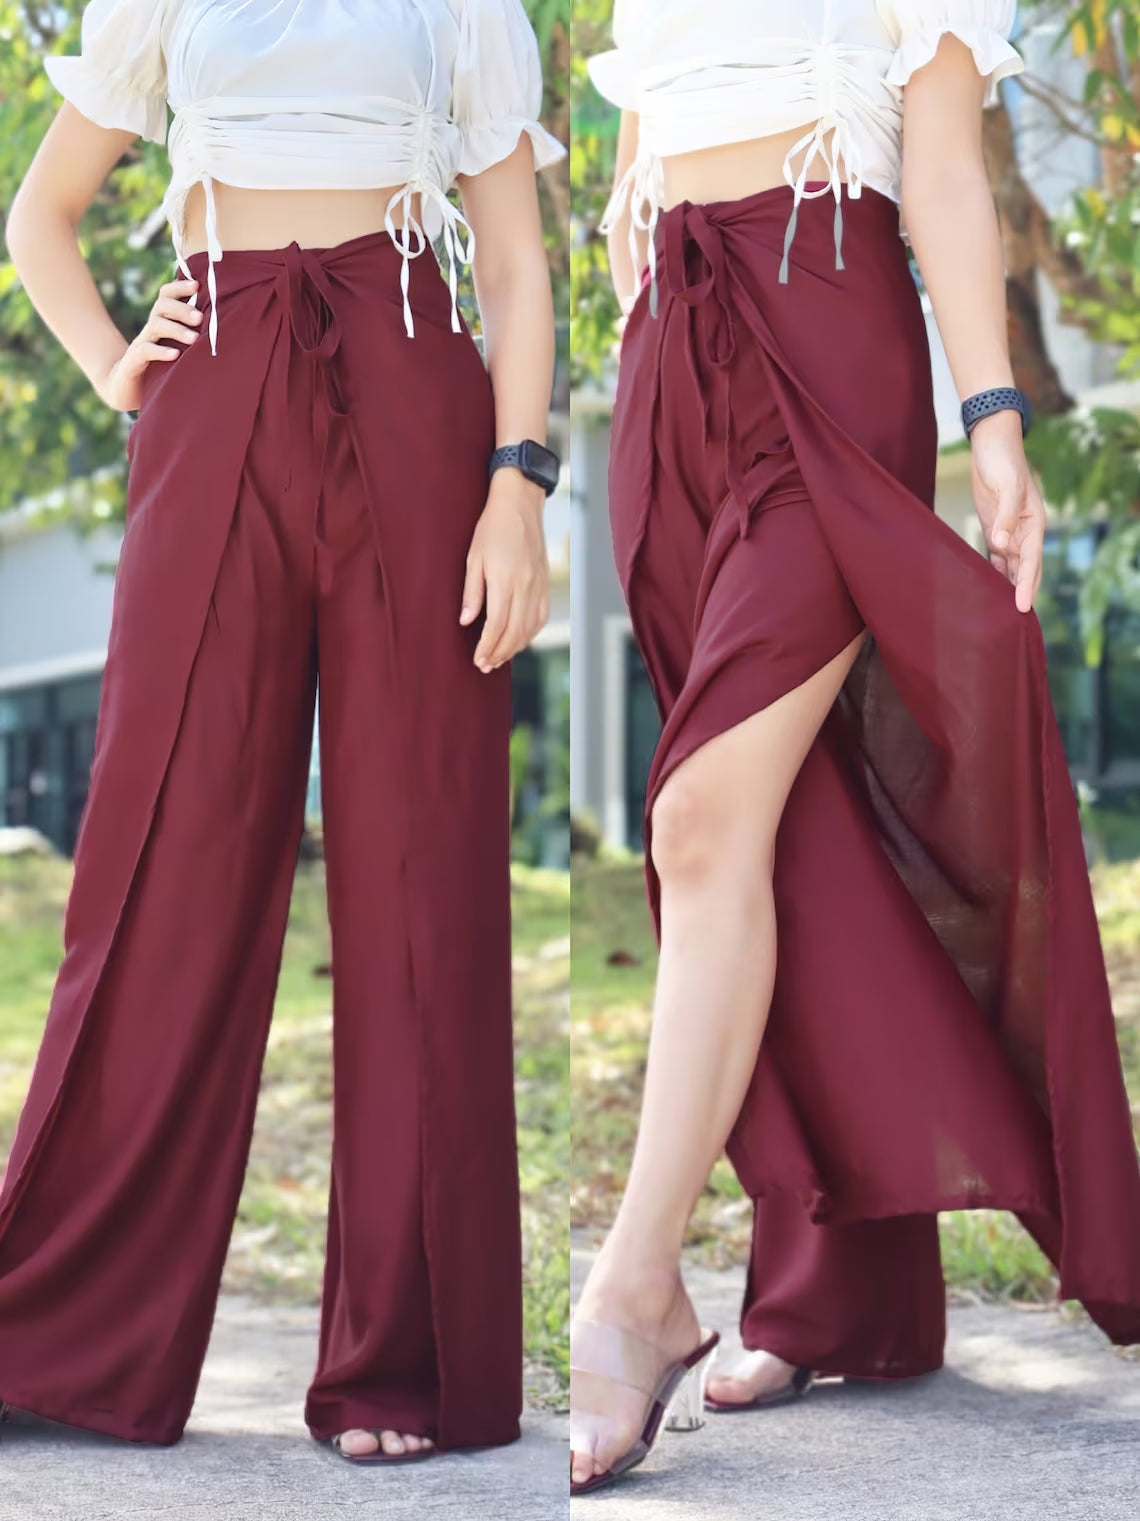 Elegant boho-style wrap pants in a rich maroon color, paired with a white top, showcasing the flowy and airy design against an outdoor backdrop.